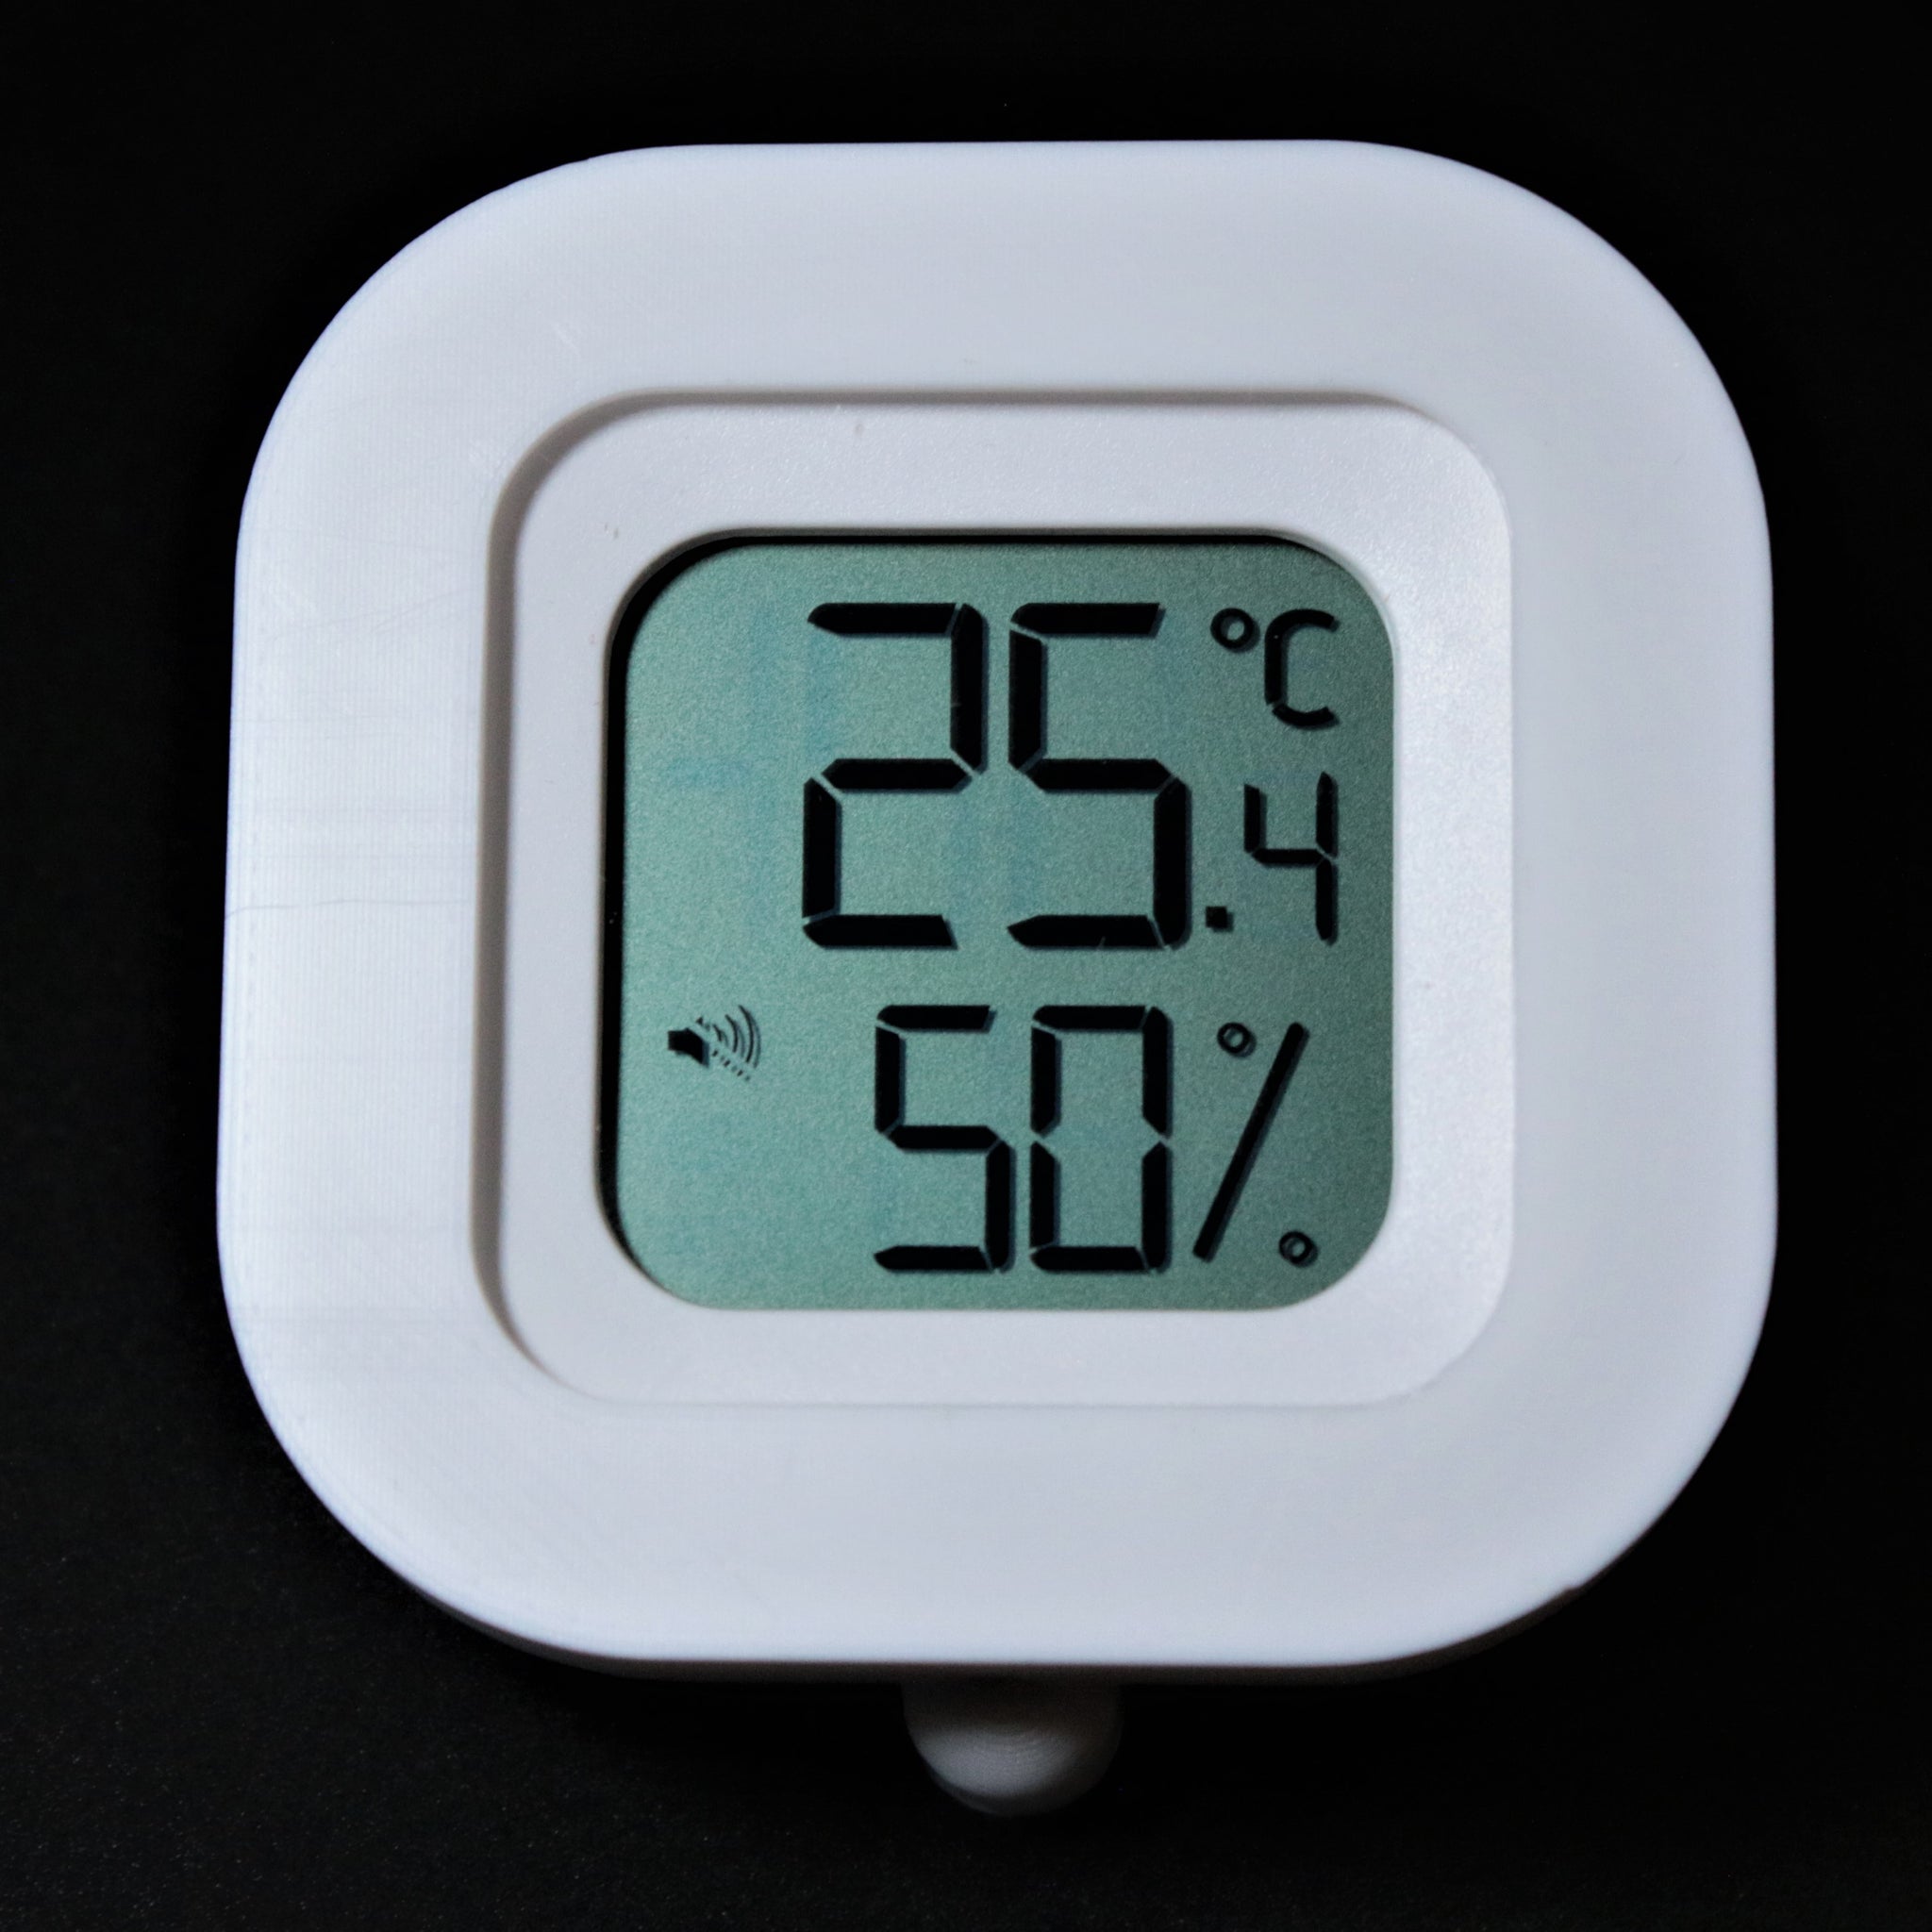 S1 Temperature Humidity Sensor for Real-time Monitoring